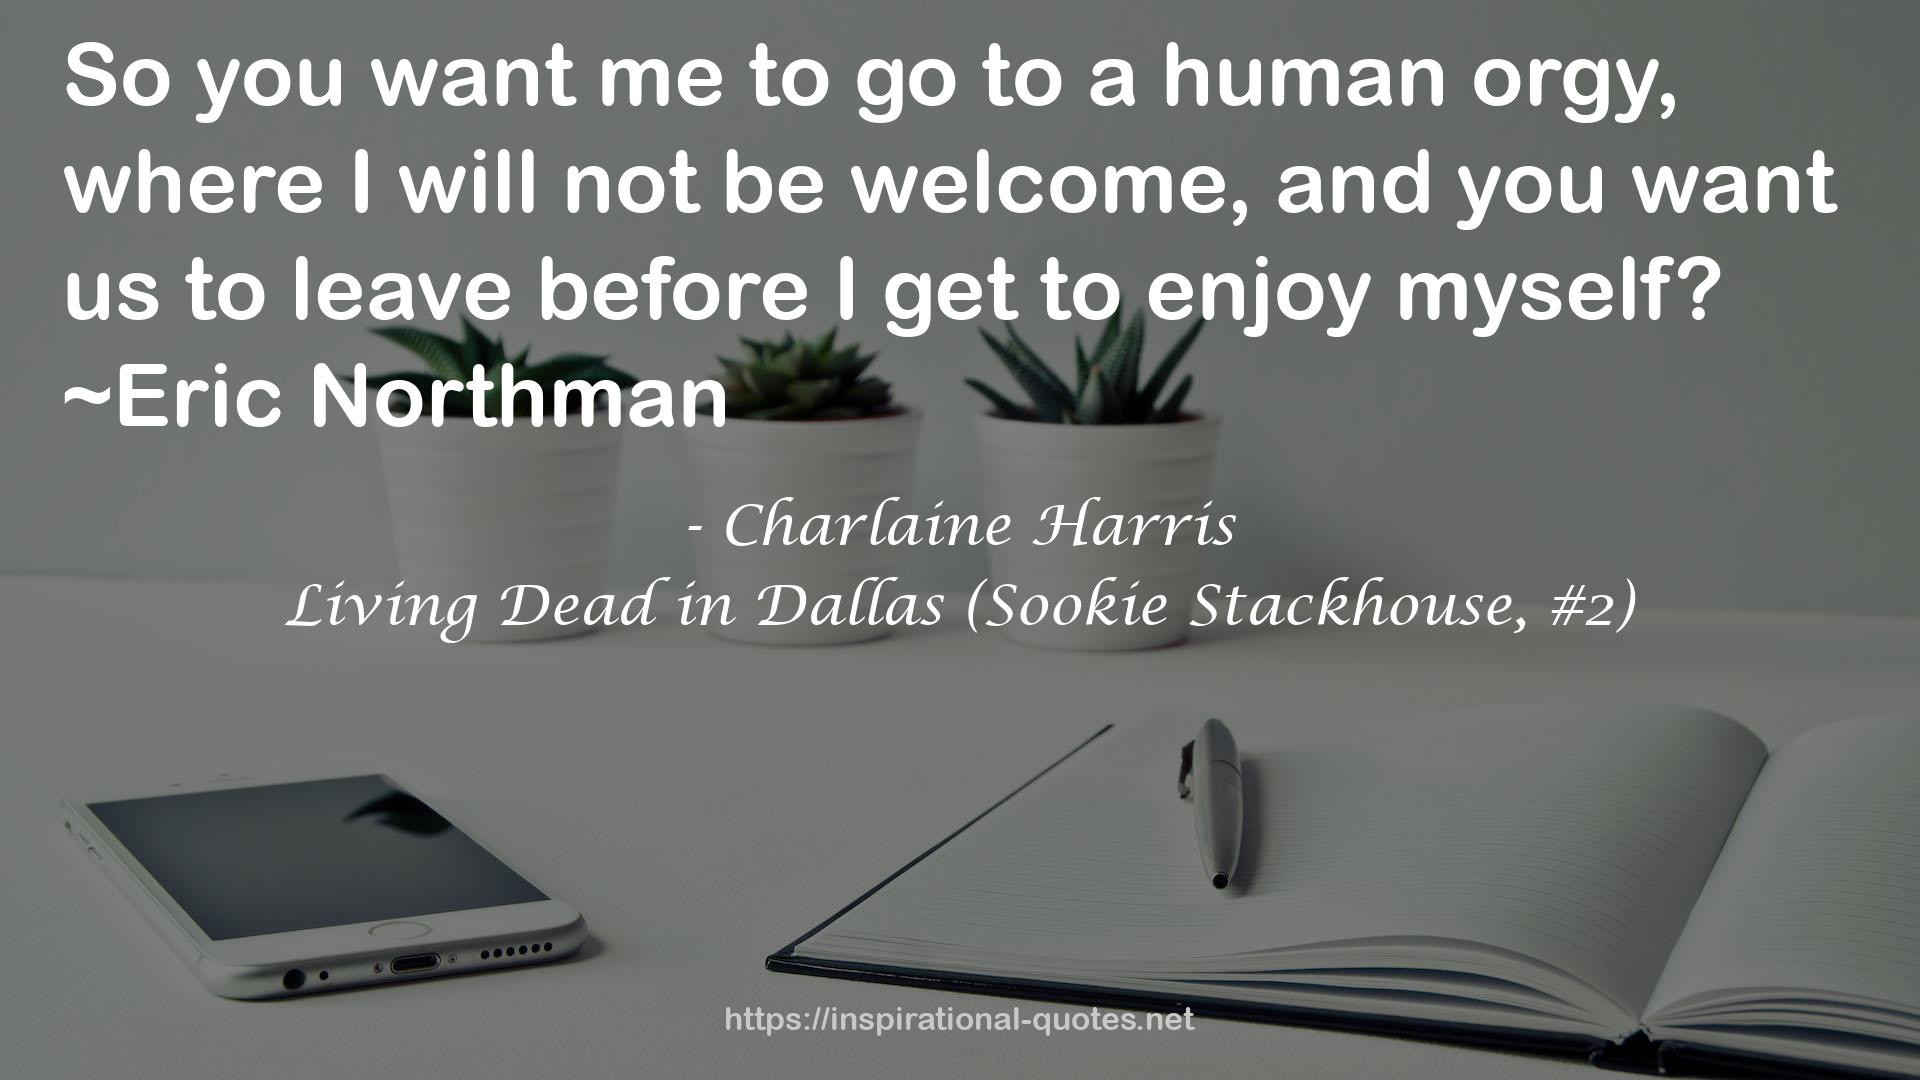 Living Dead in Dallas (Sookie Stackhouse, #2) QUOTES